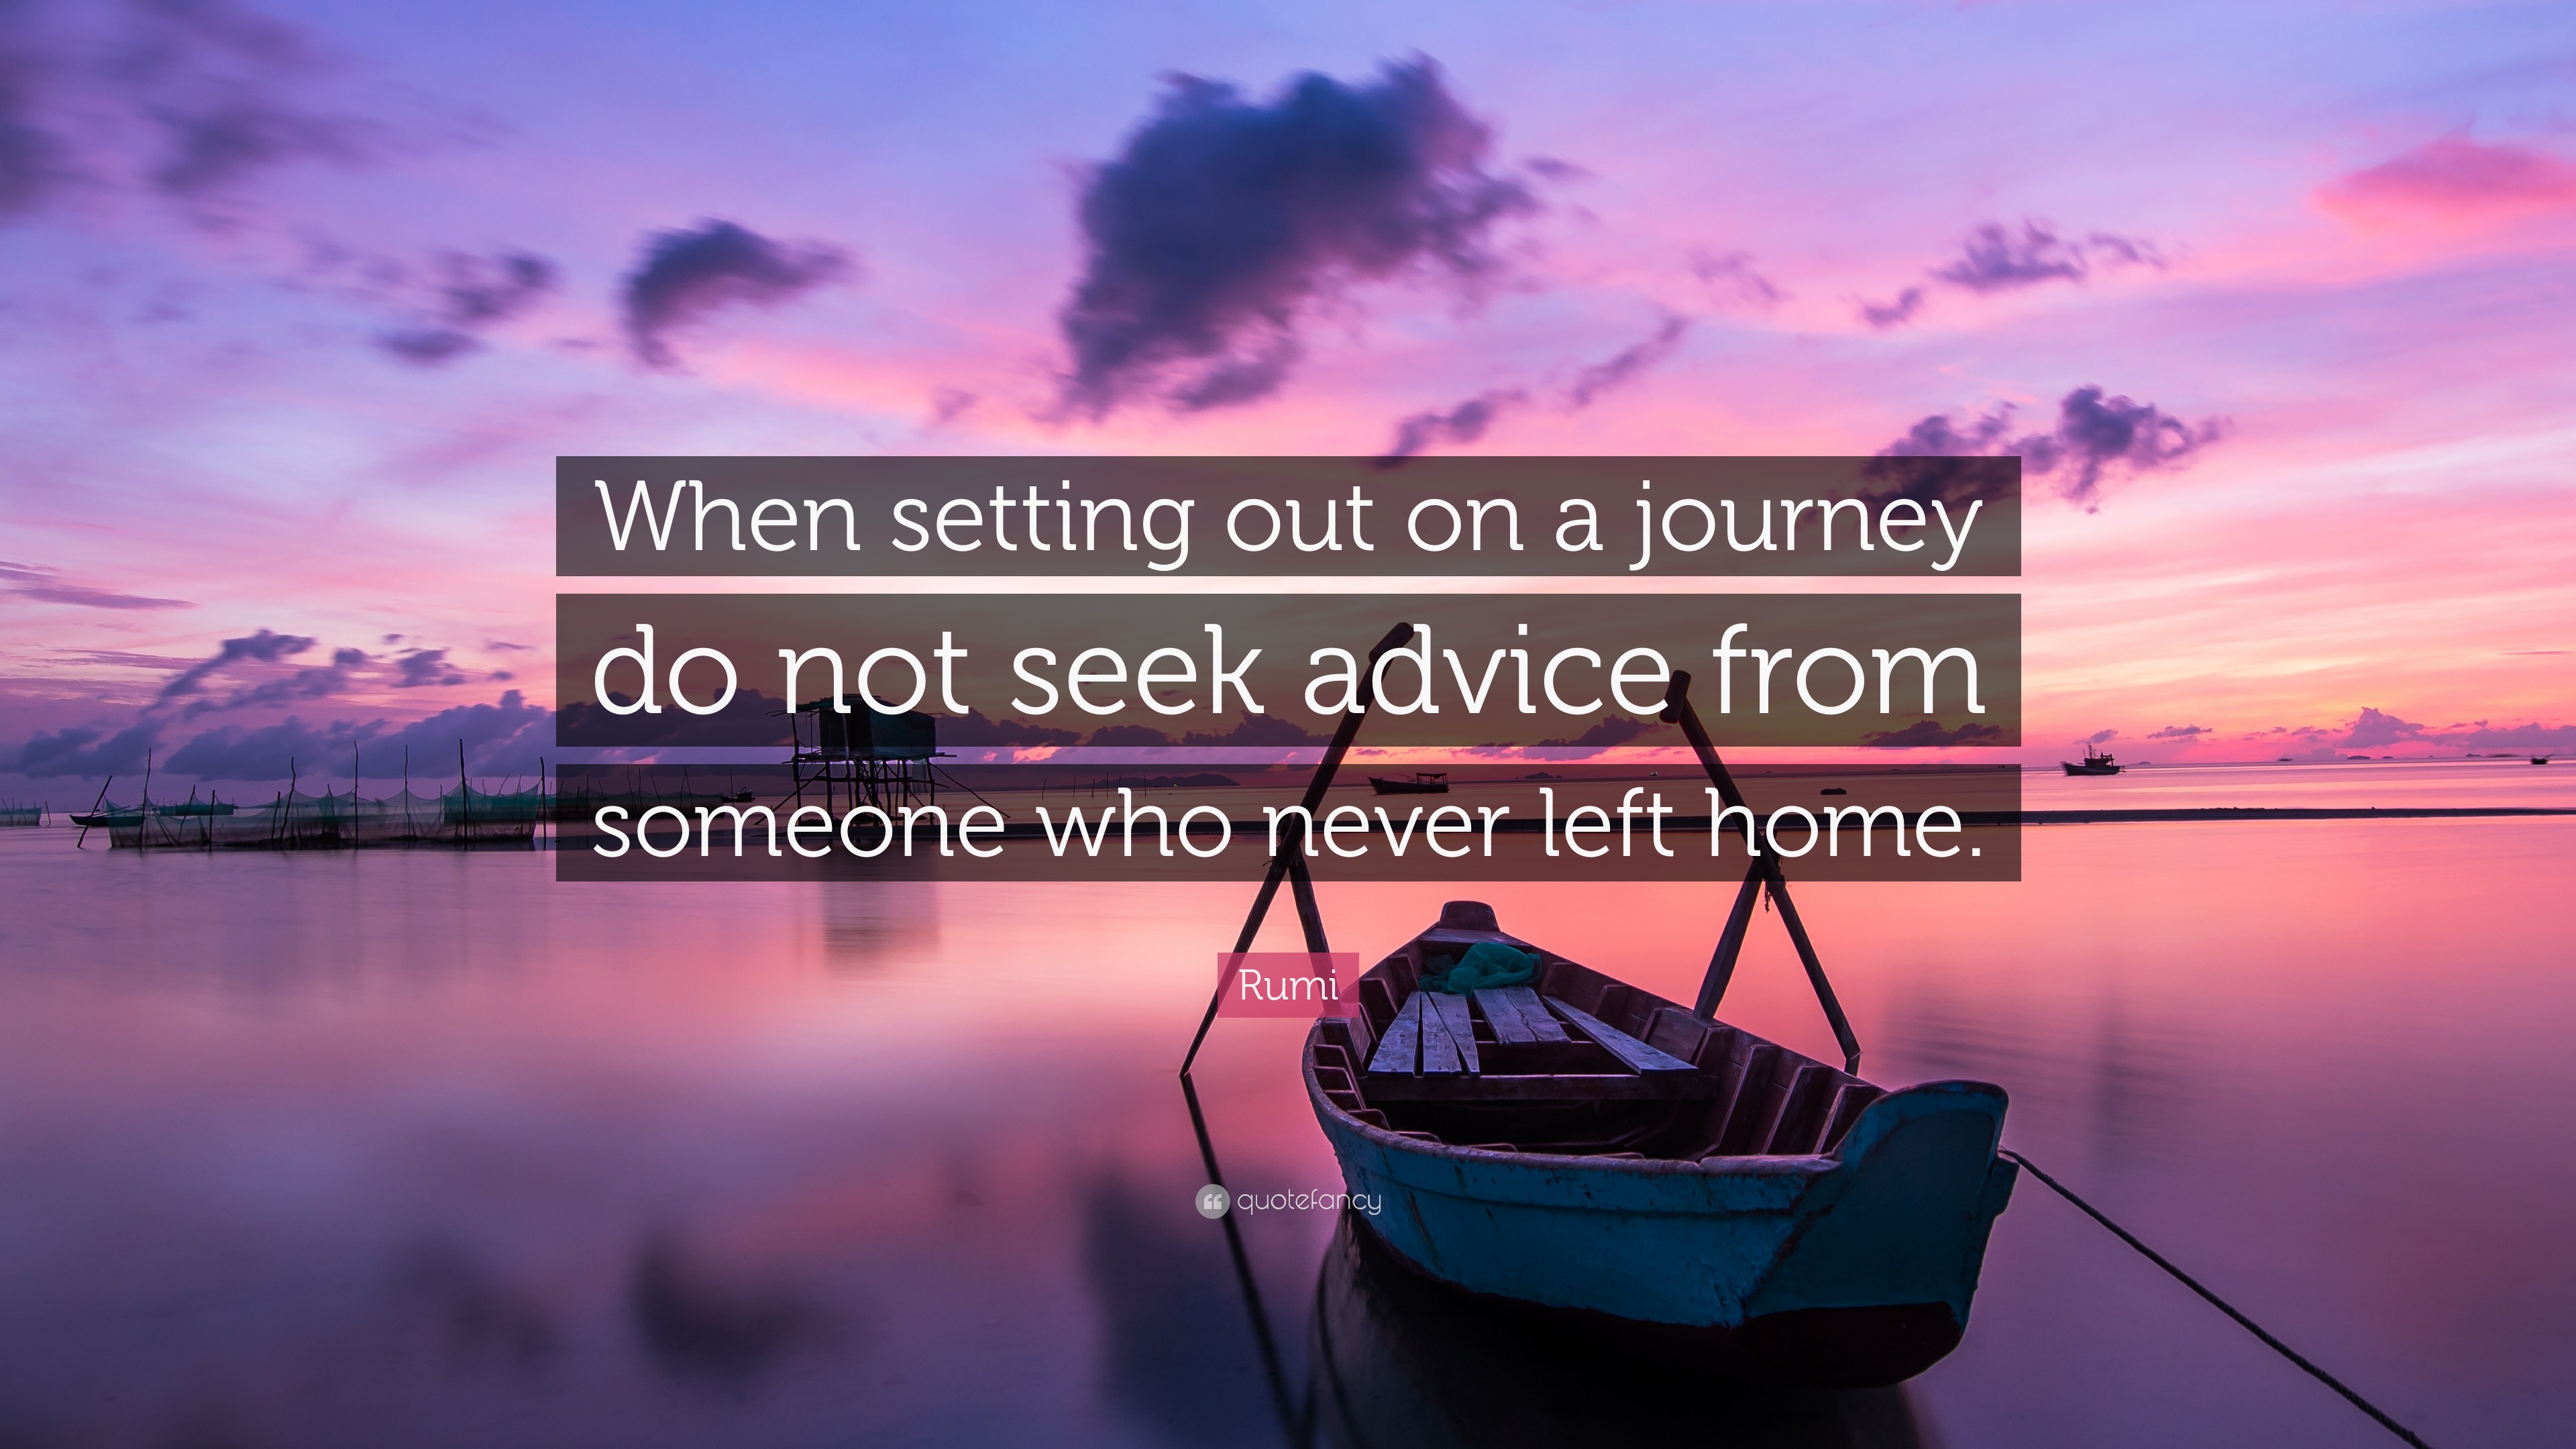 Rumi Quote: “When setting out on a journey do not seek advice from ...